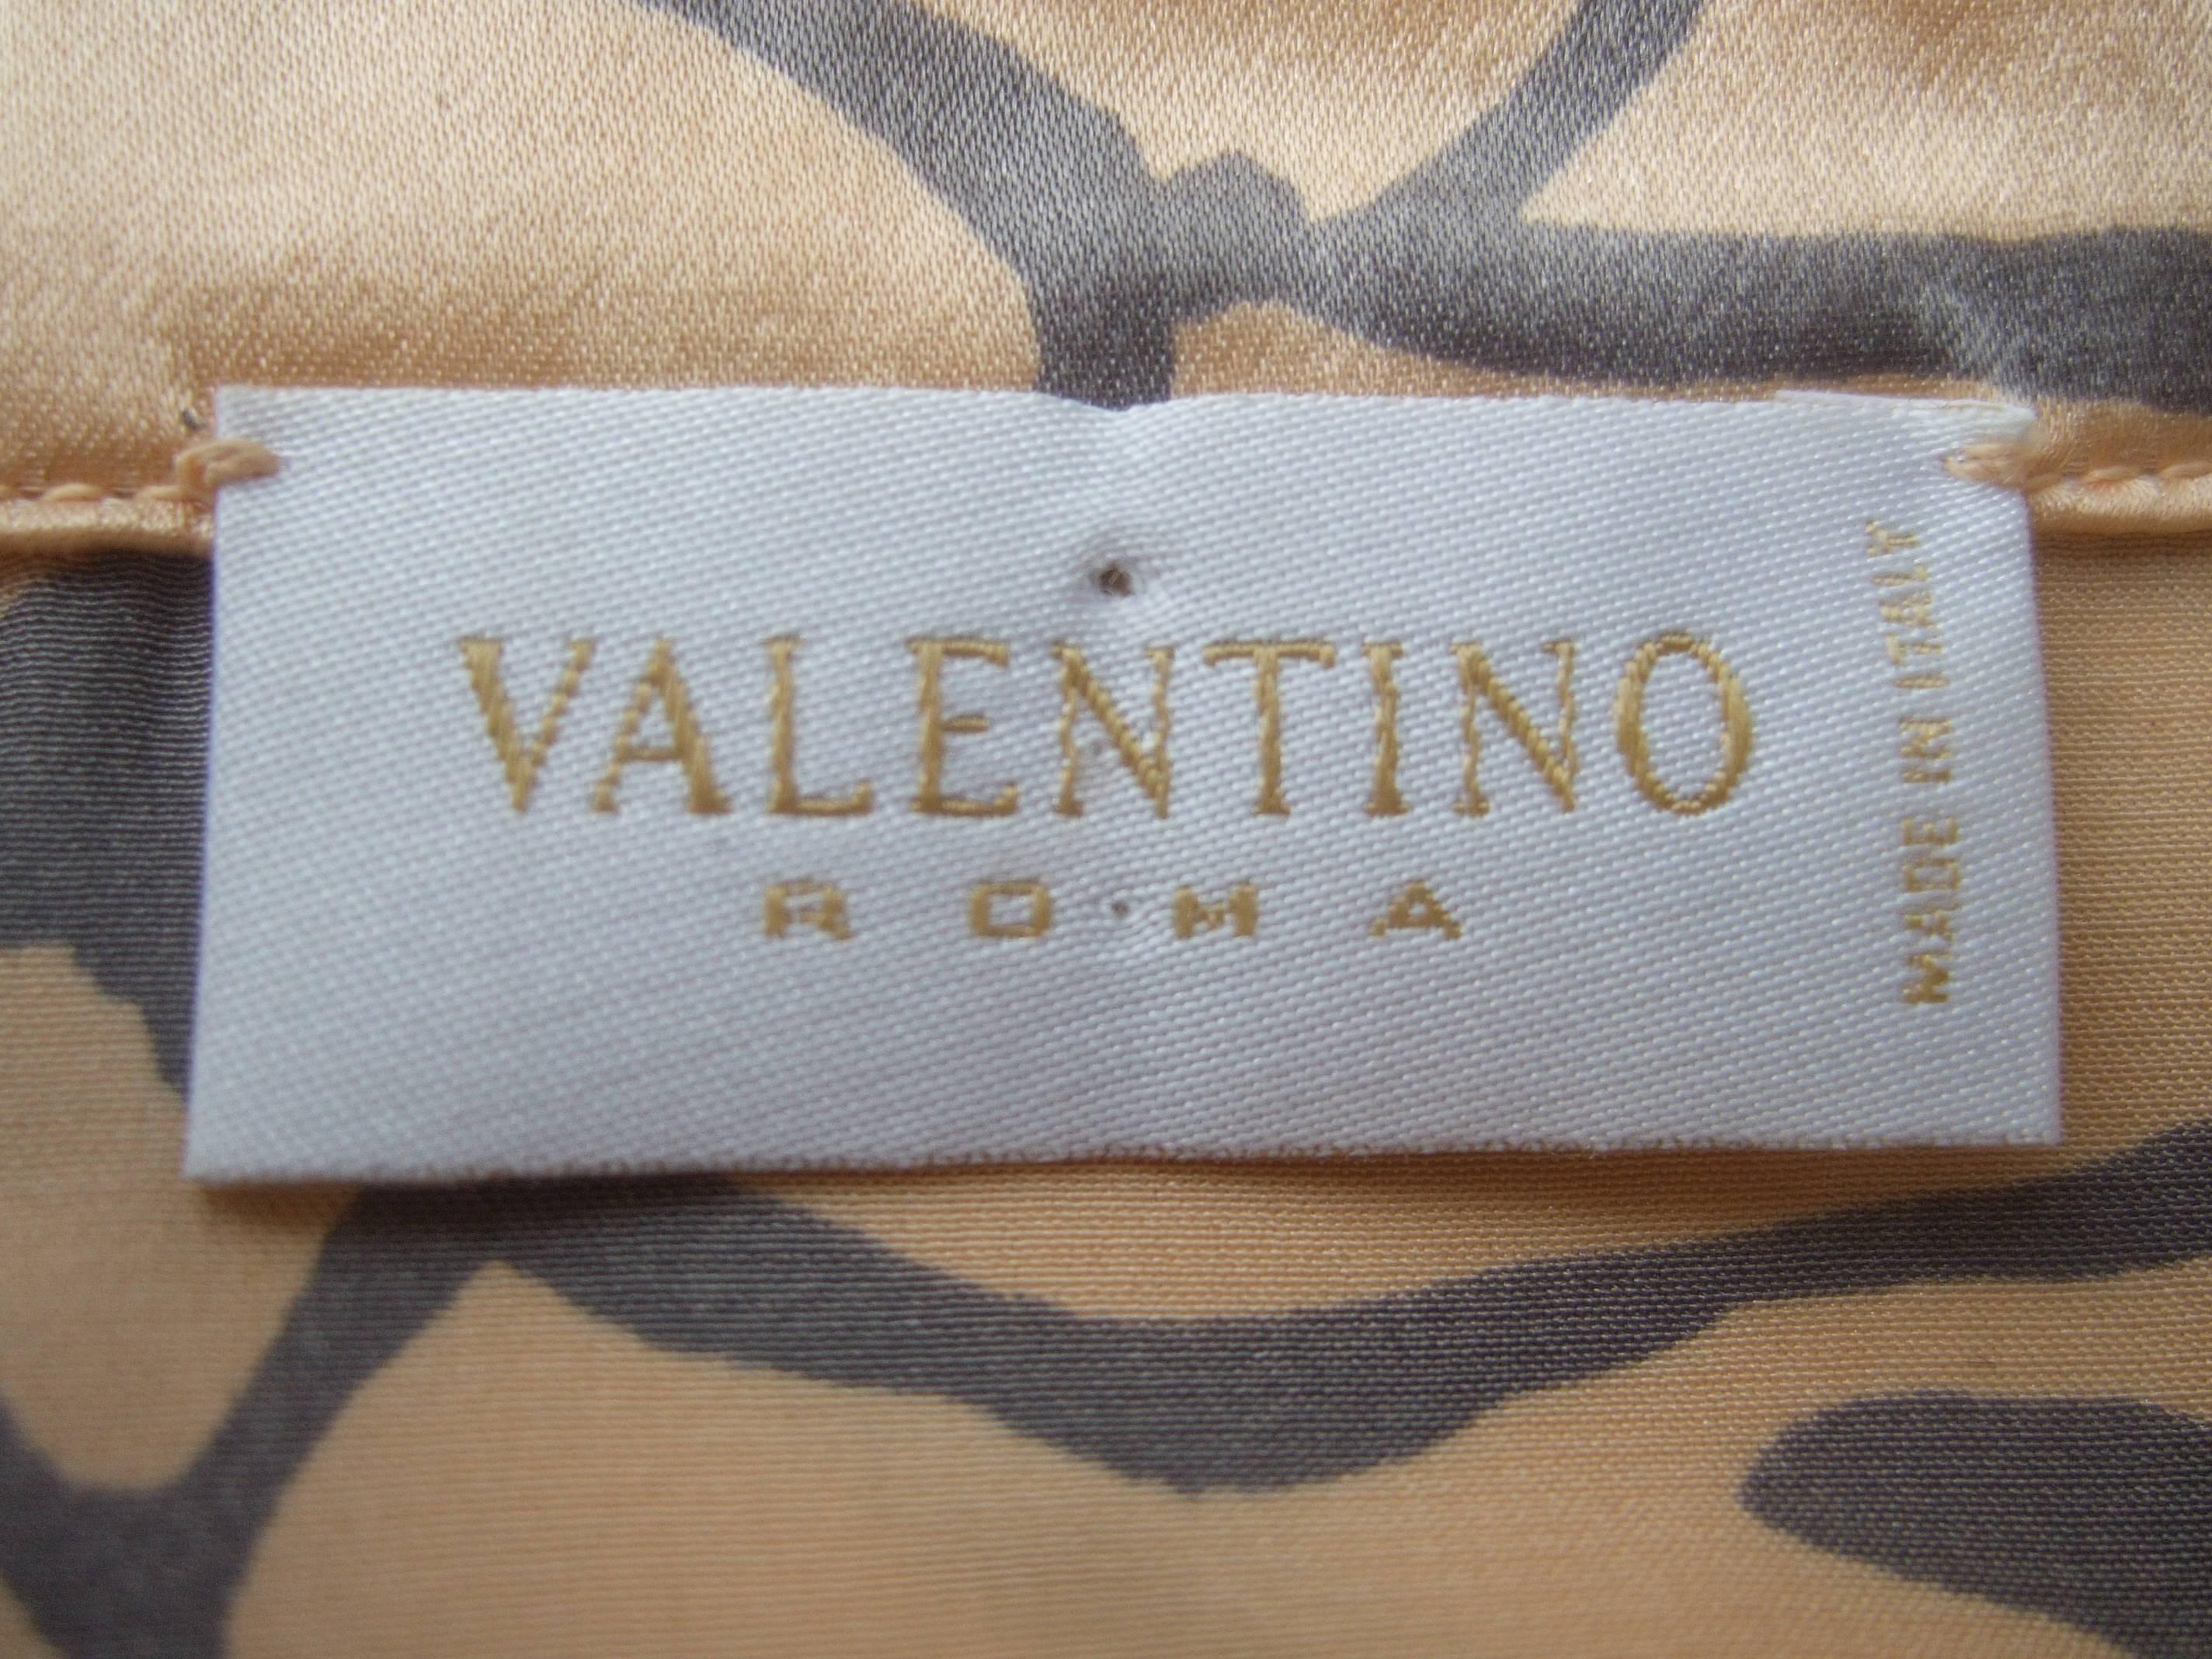 Valentino Italy Silk Charmeuse Peach and Gray Print Blouse US Size 12  For Sale 1